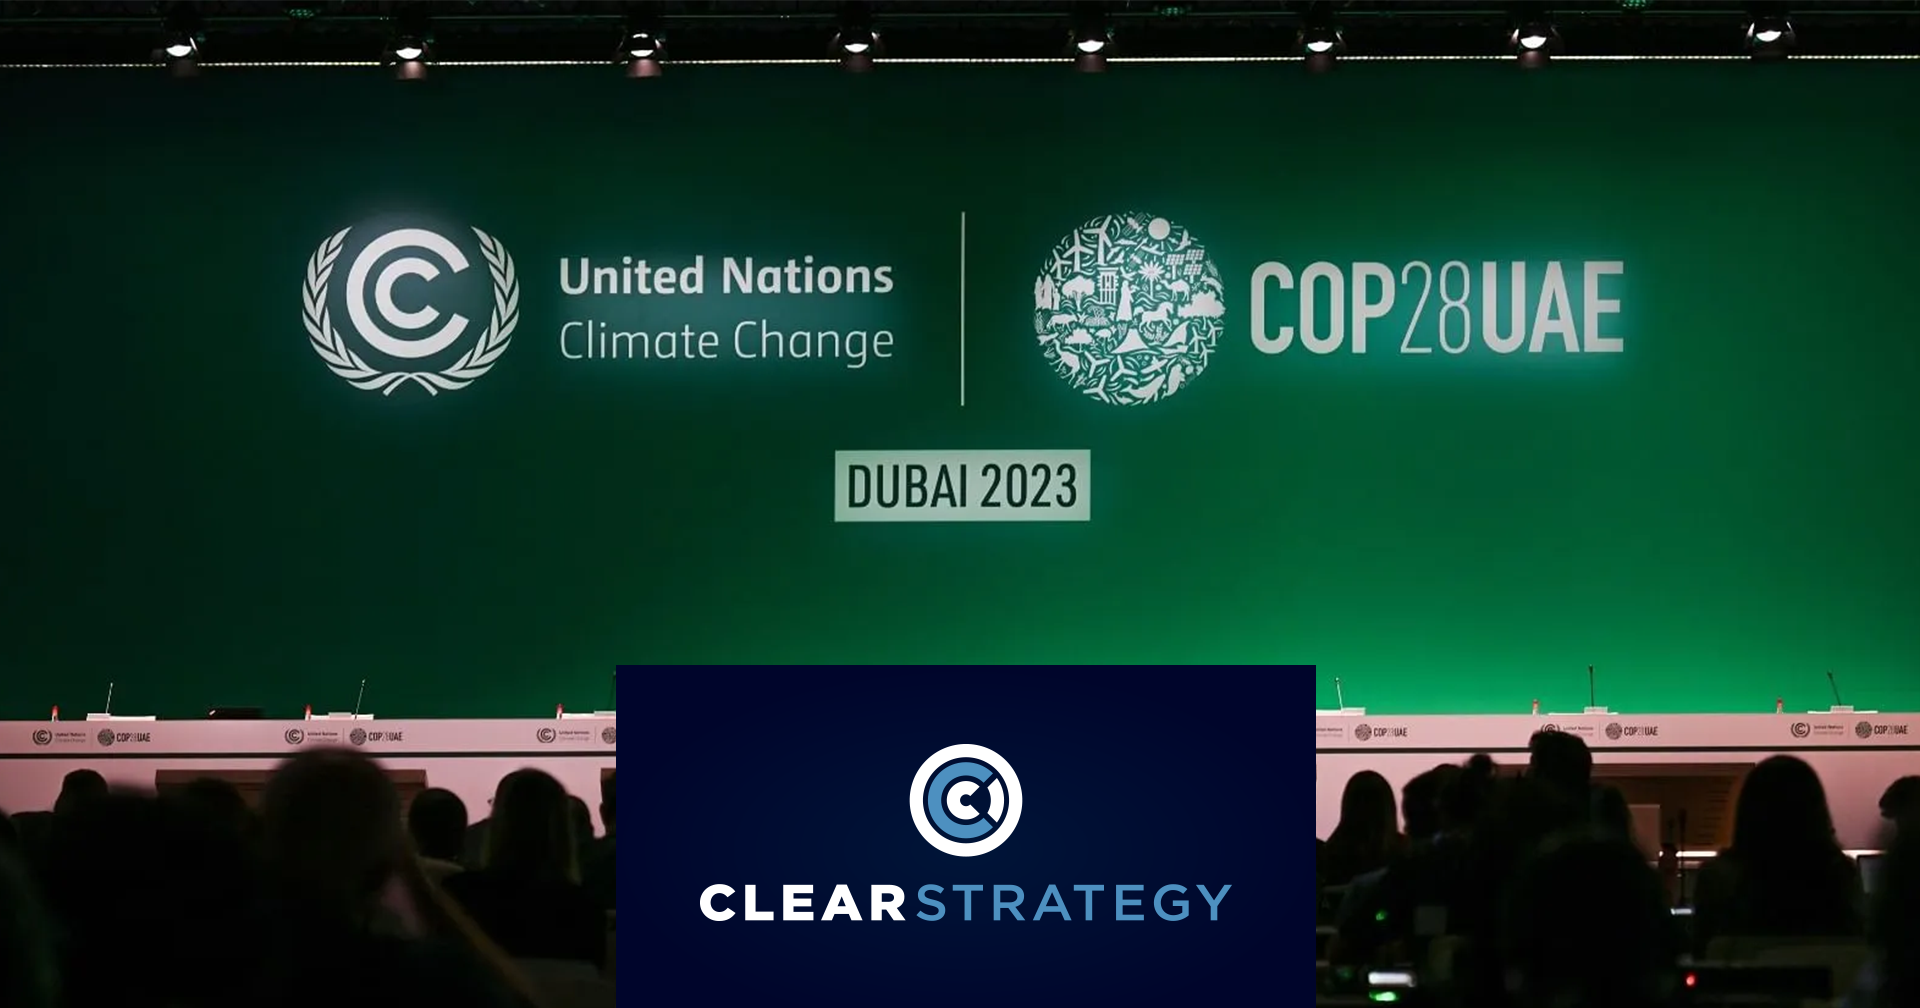 COP28 Climate Talks Culminate in Decision to Transition Away from Fossil Fuels